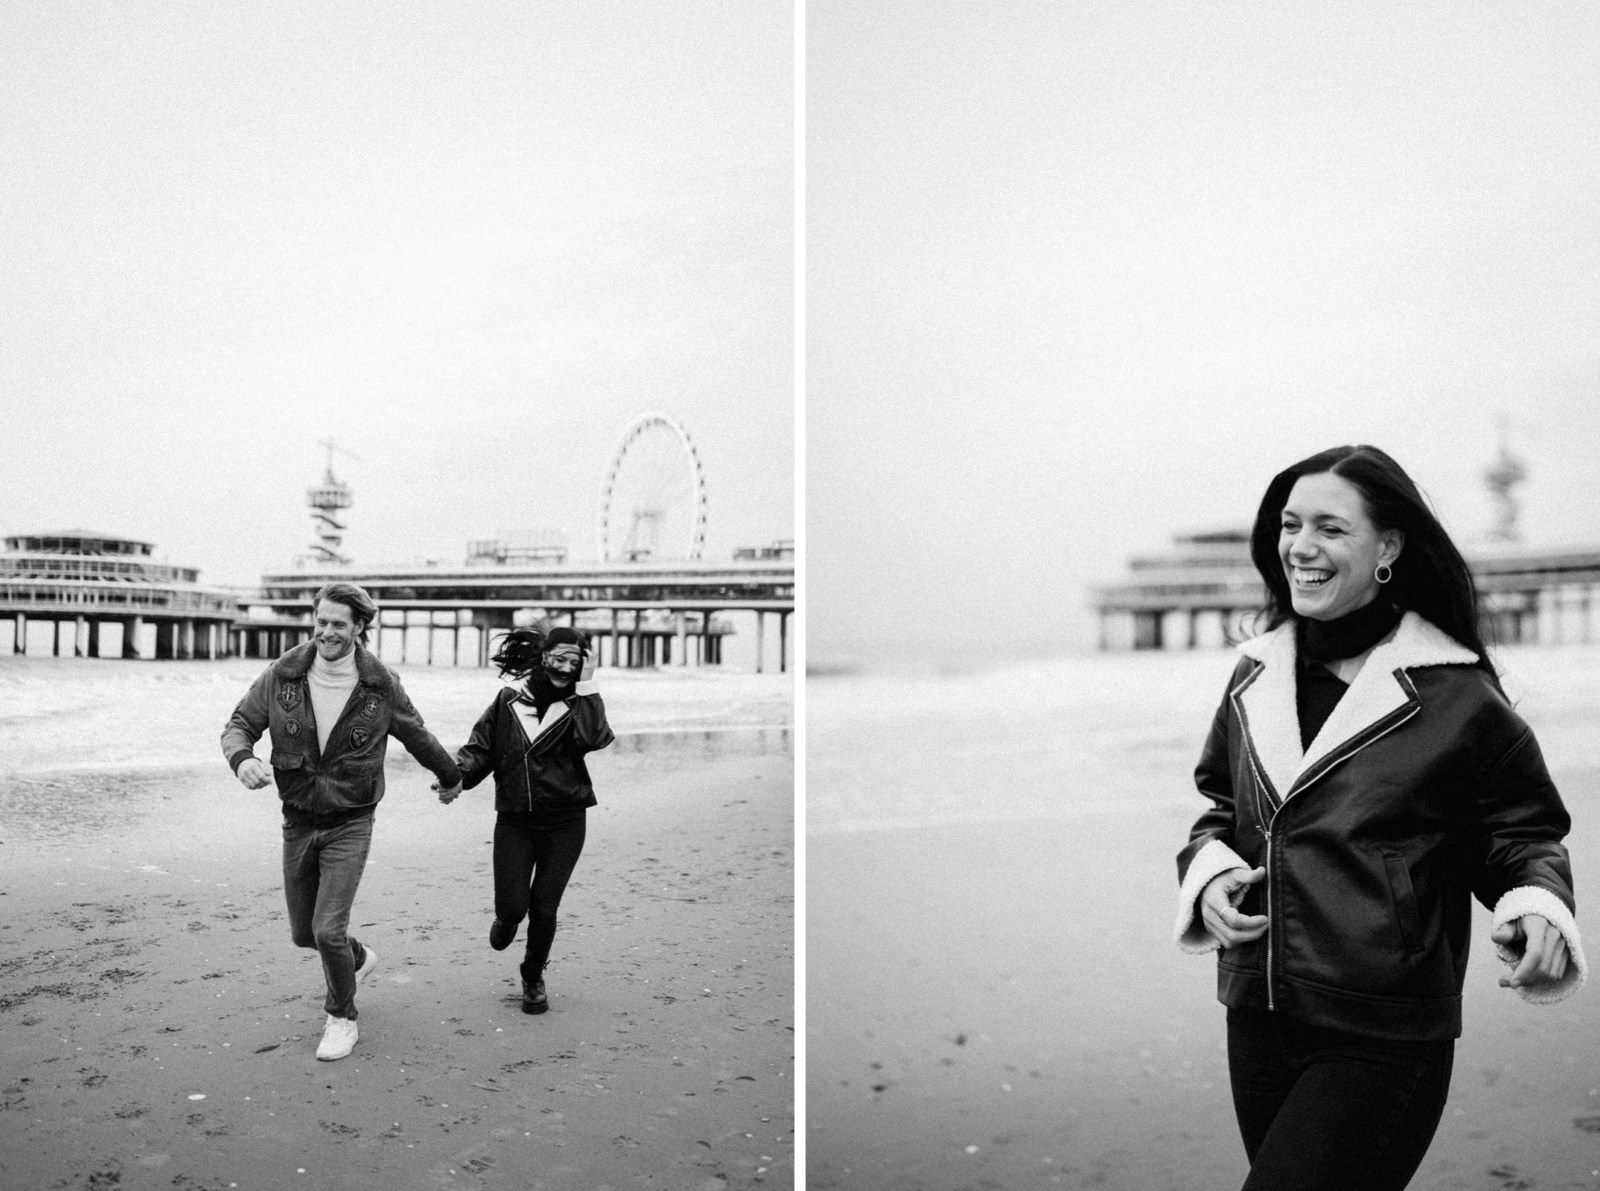 couple having fun at the beach in Netherlands